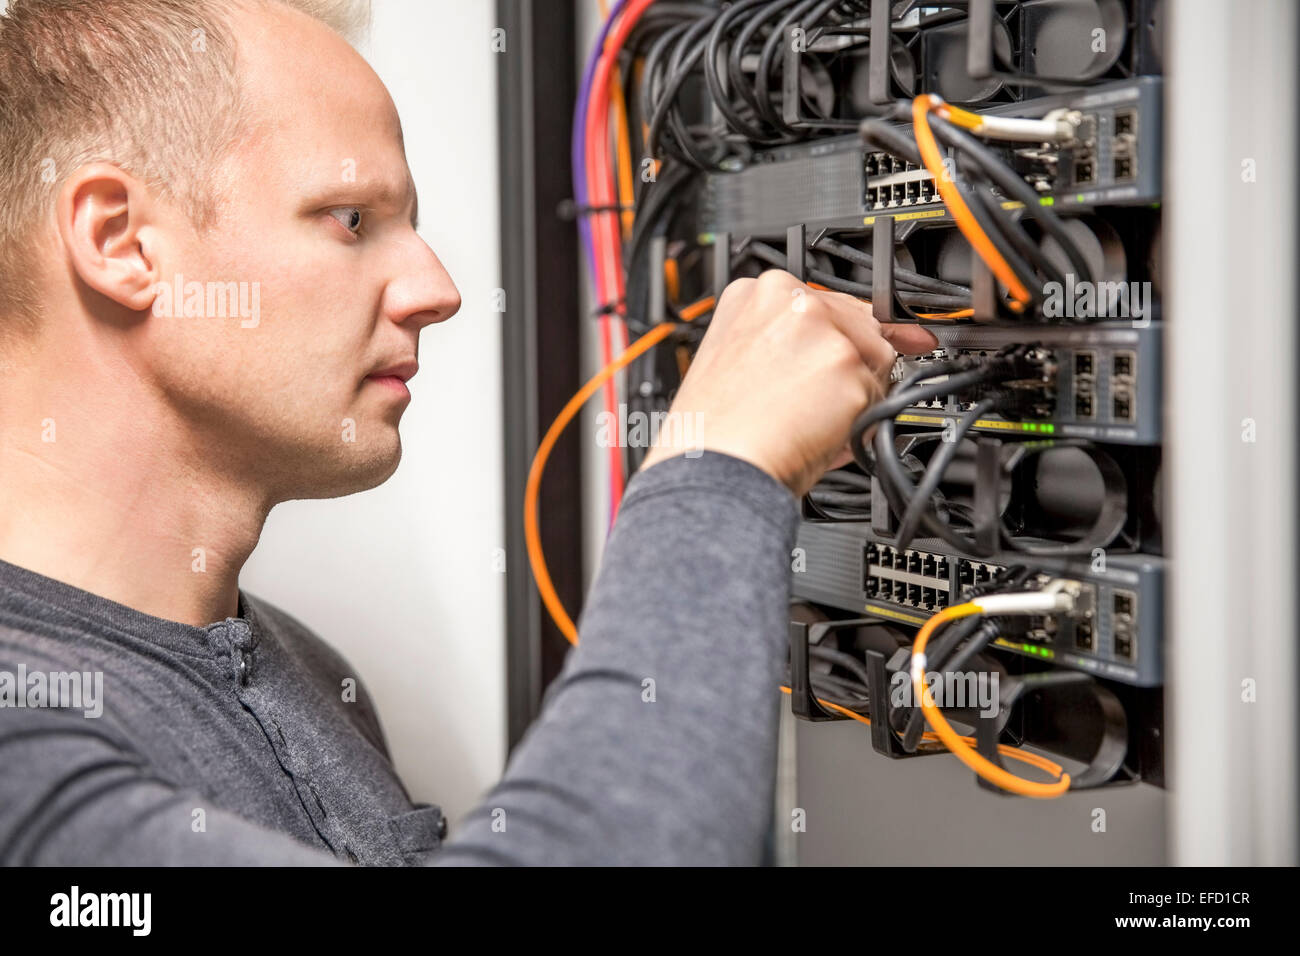 IT consultant connecting network cable into switch Stock Photo